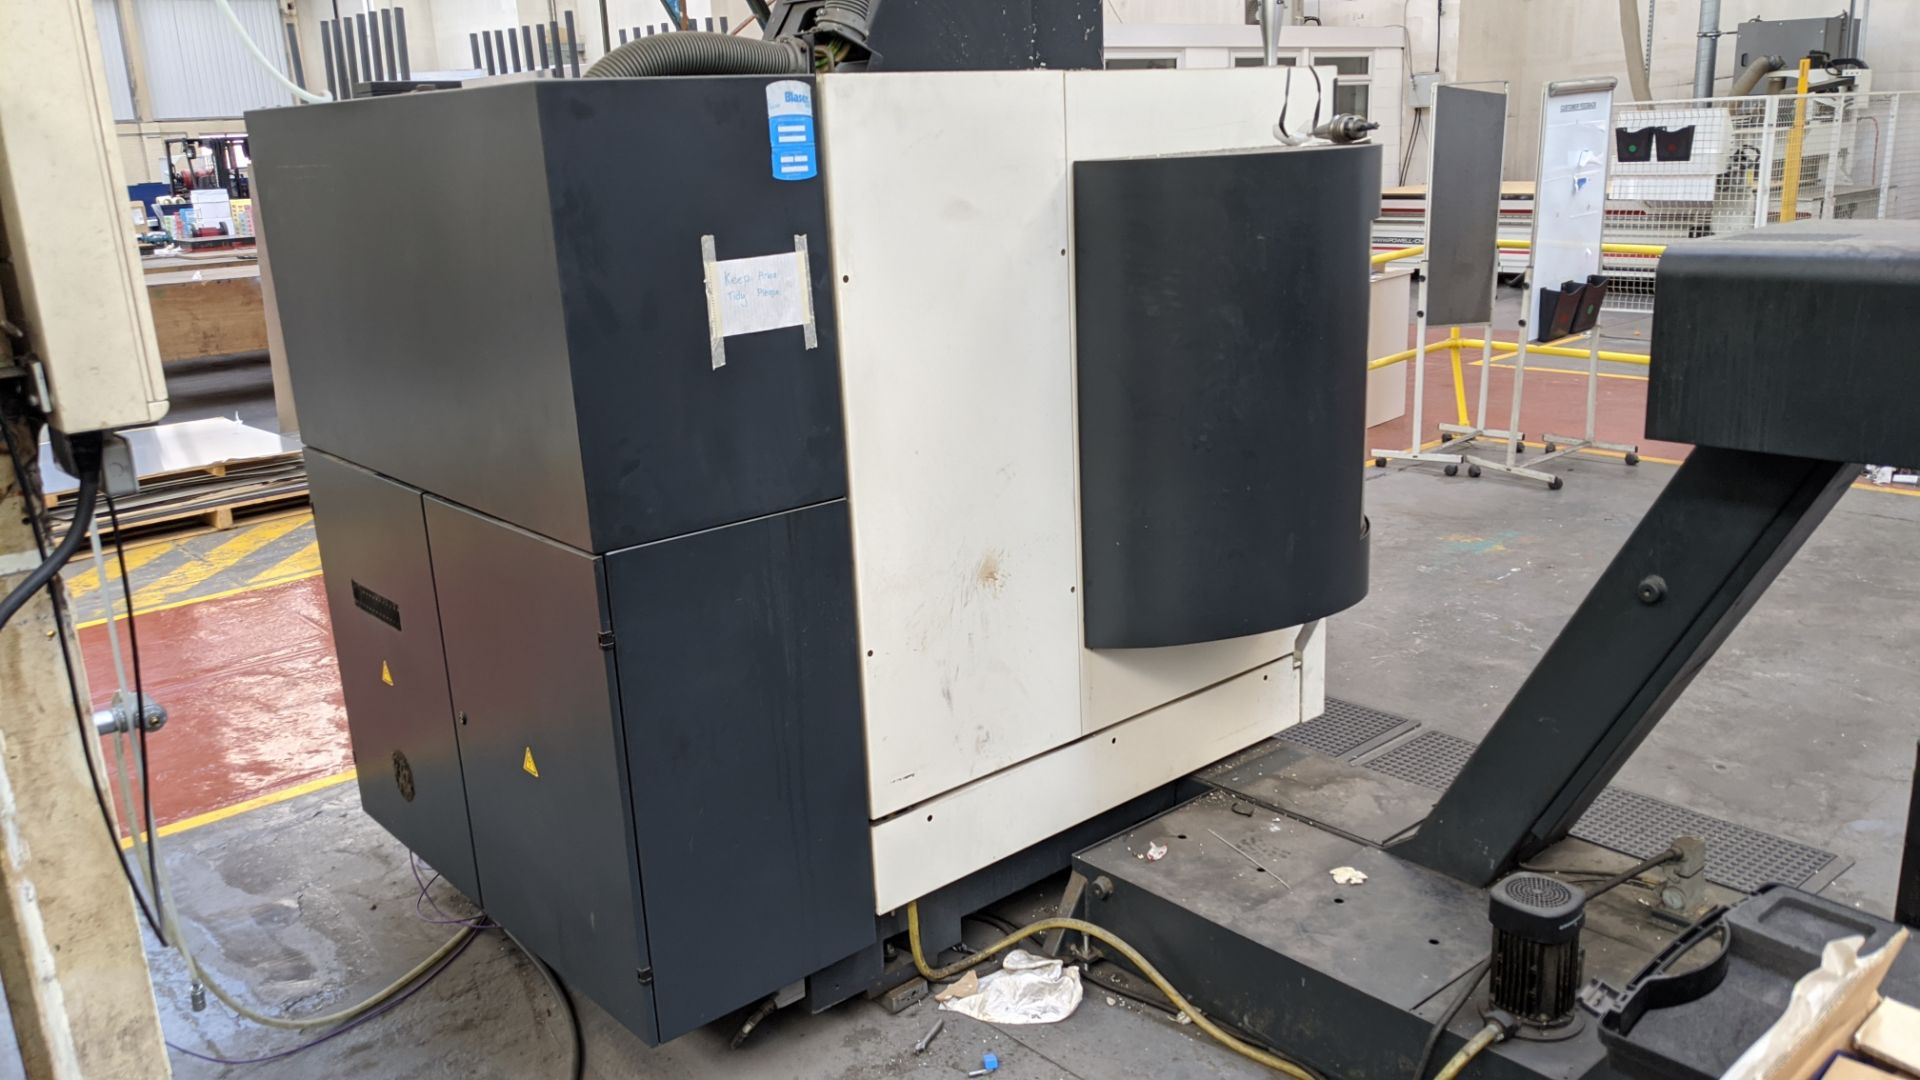 2012 DMG Gildemeister DMU 50 Ecoline Eco 5-axis milling machining centre with Siemens DMG control - Image 11 of 19